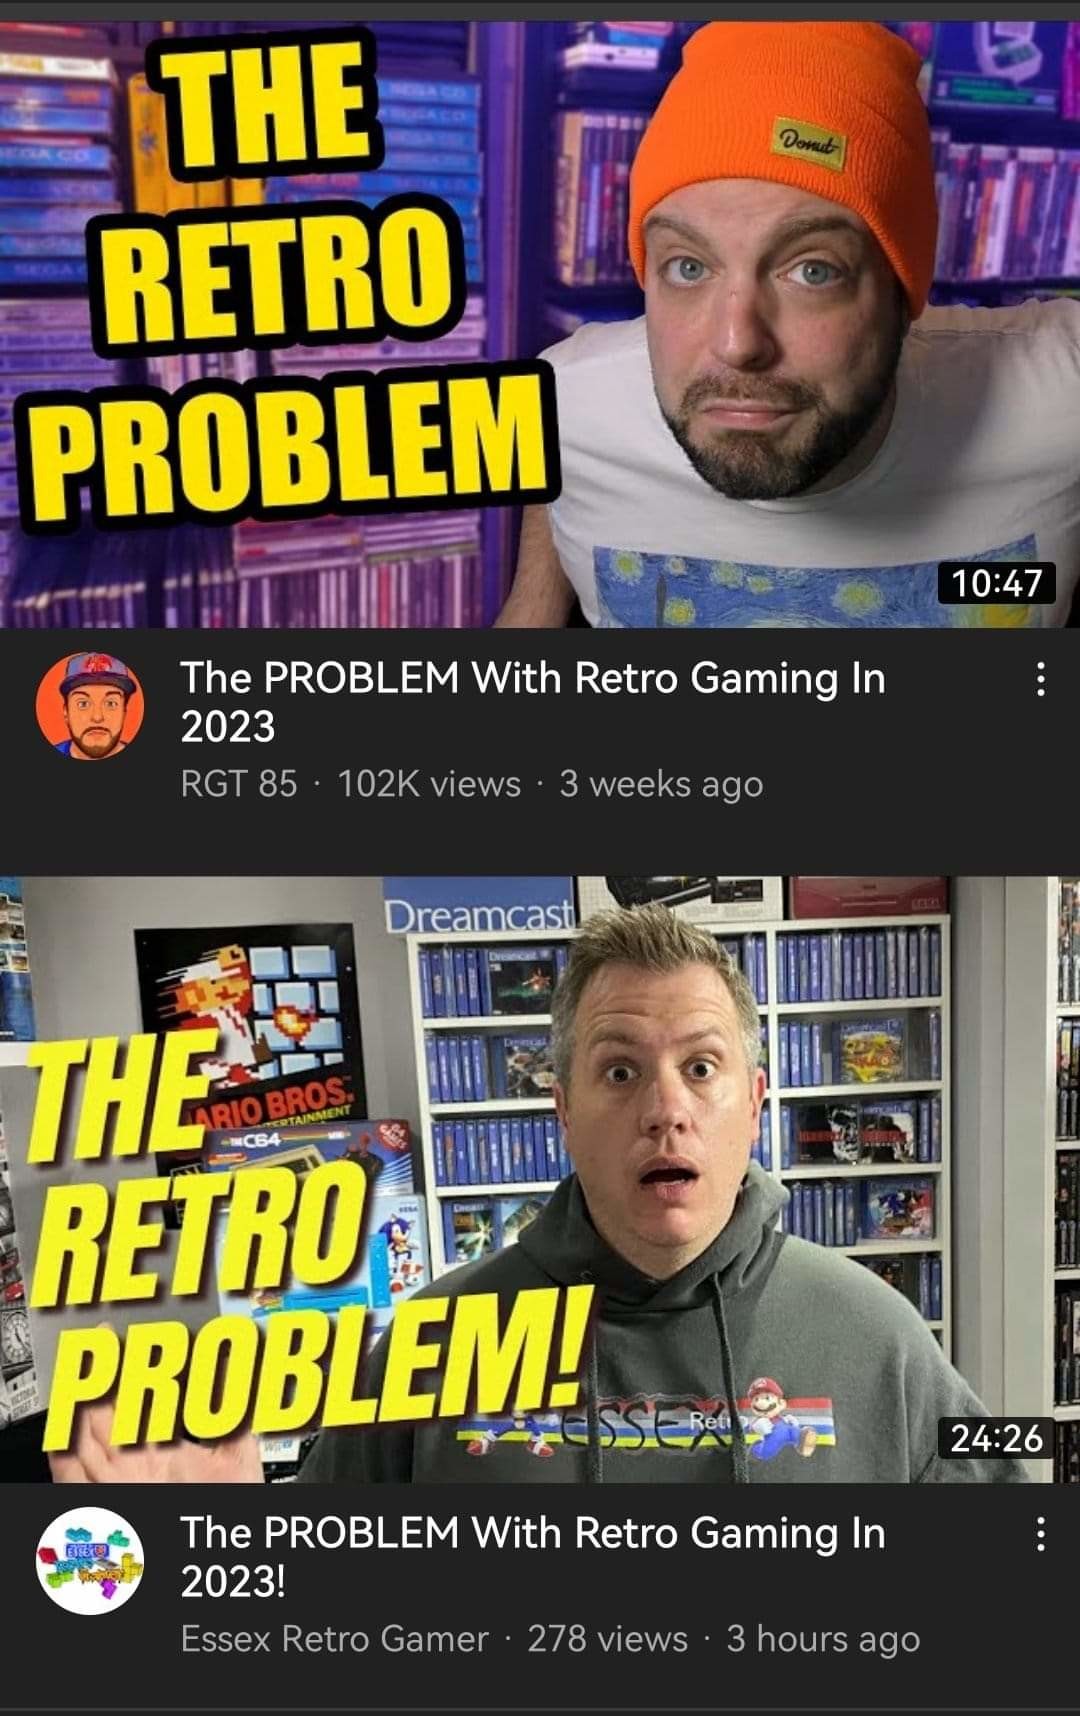 The retro problem. .. Did something spark this, or this just because people need to latch onto a topic for views